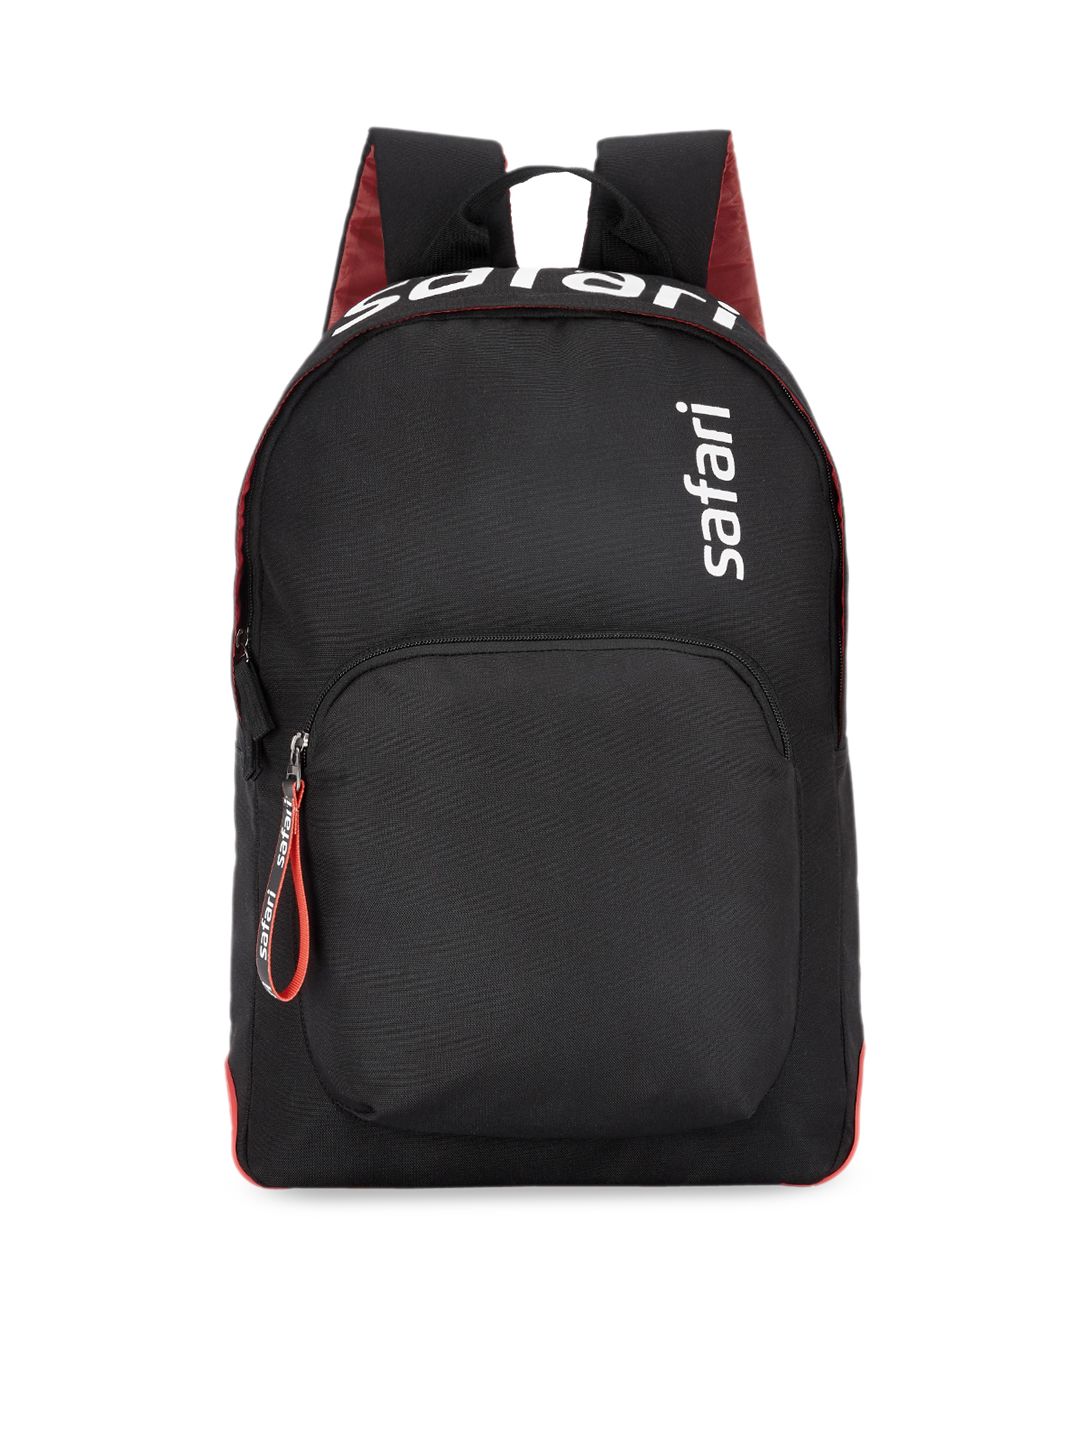 Safari Unisex Black & Red Solid Backpack Price in India